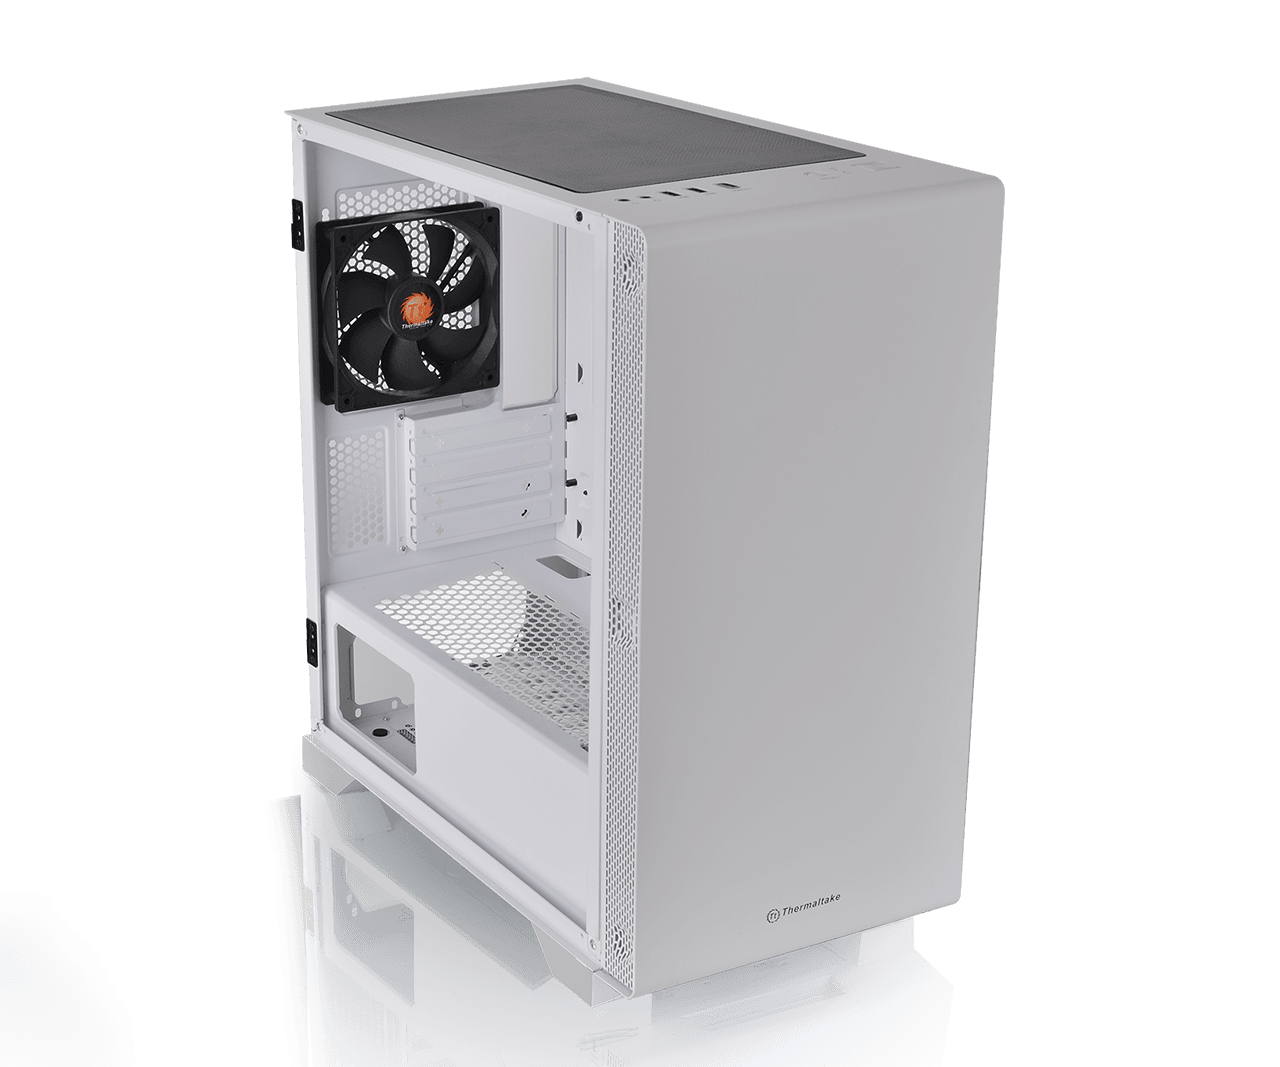 Vỏ Case Thermaltake S100 Tempered Glass Snow Edition (Mid Tower / Màu Trắng)